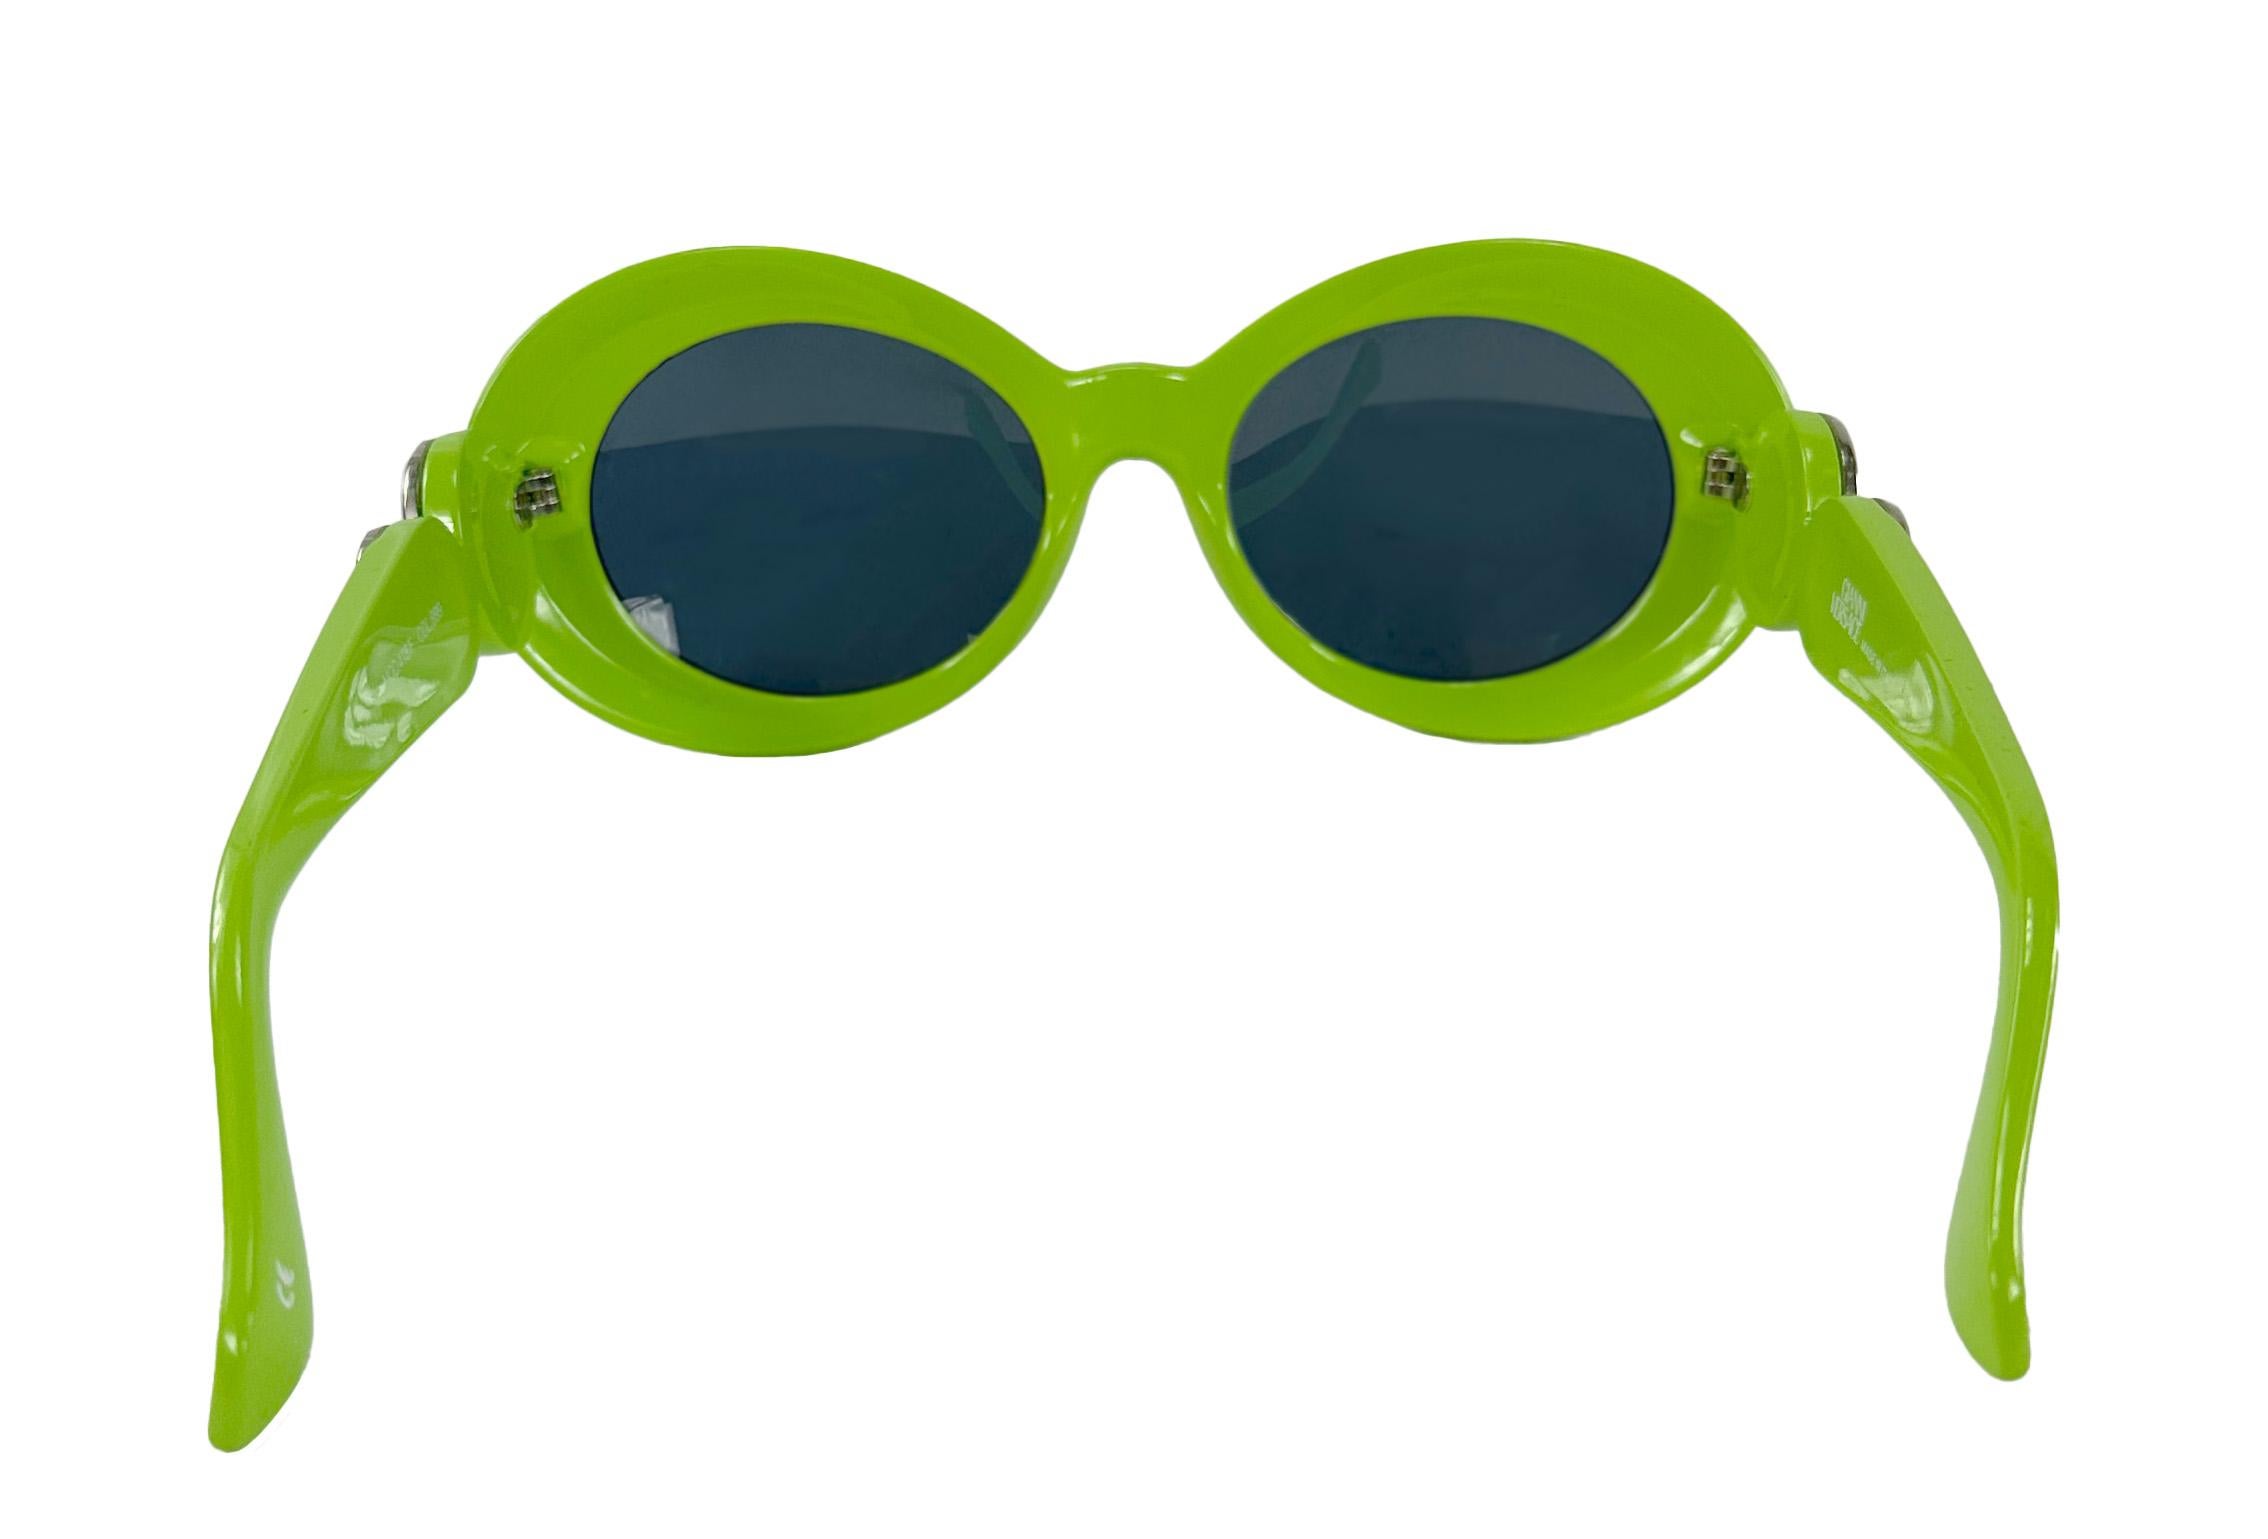 S/S 1996 Gianni Versace Lime Green Rhinestone Round Double Medusa Sunglasses For Sale 4